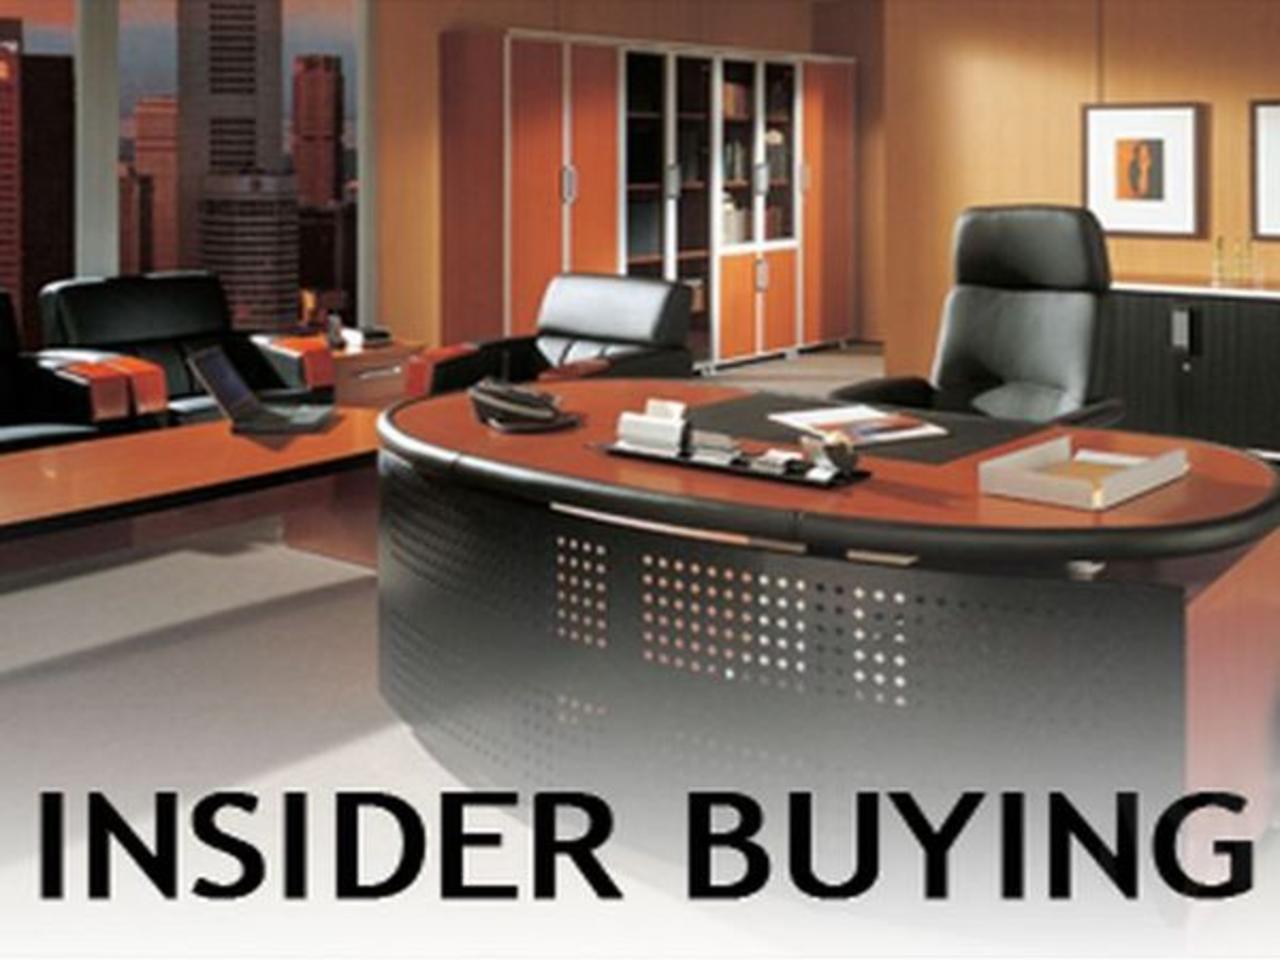 Thursday 11/11 Insider Buying Report: NOW, SMG